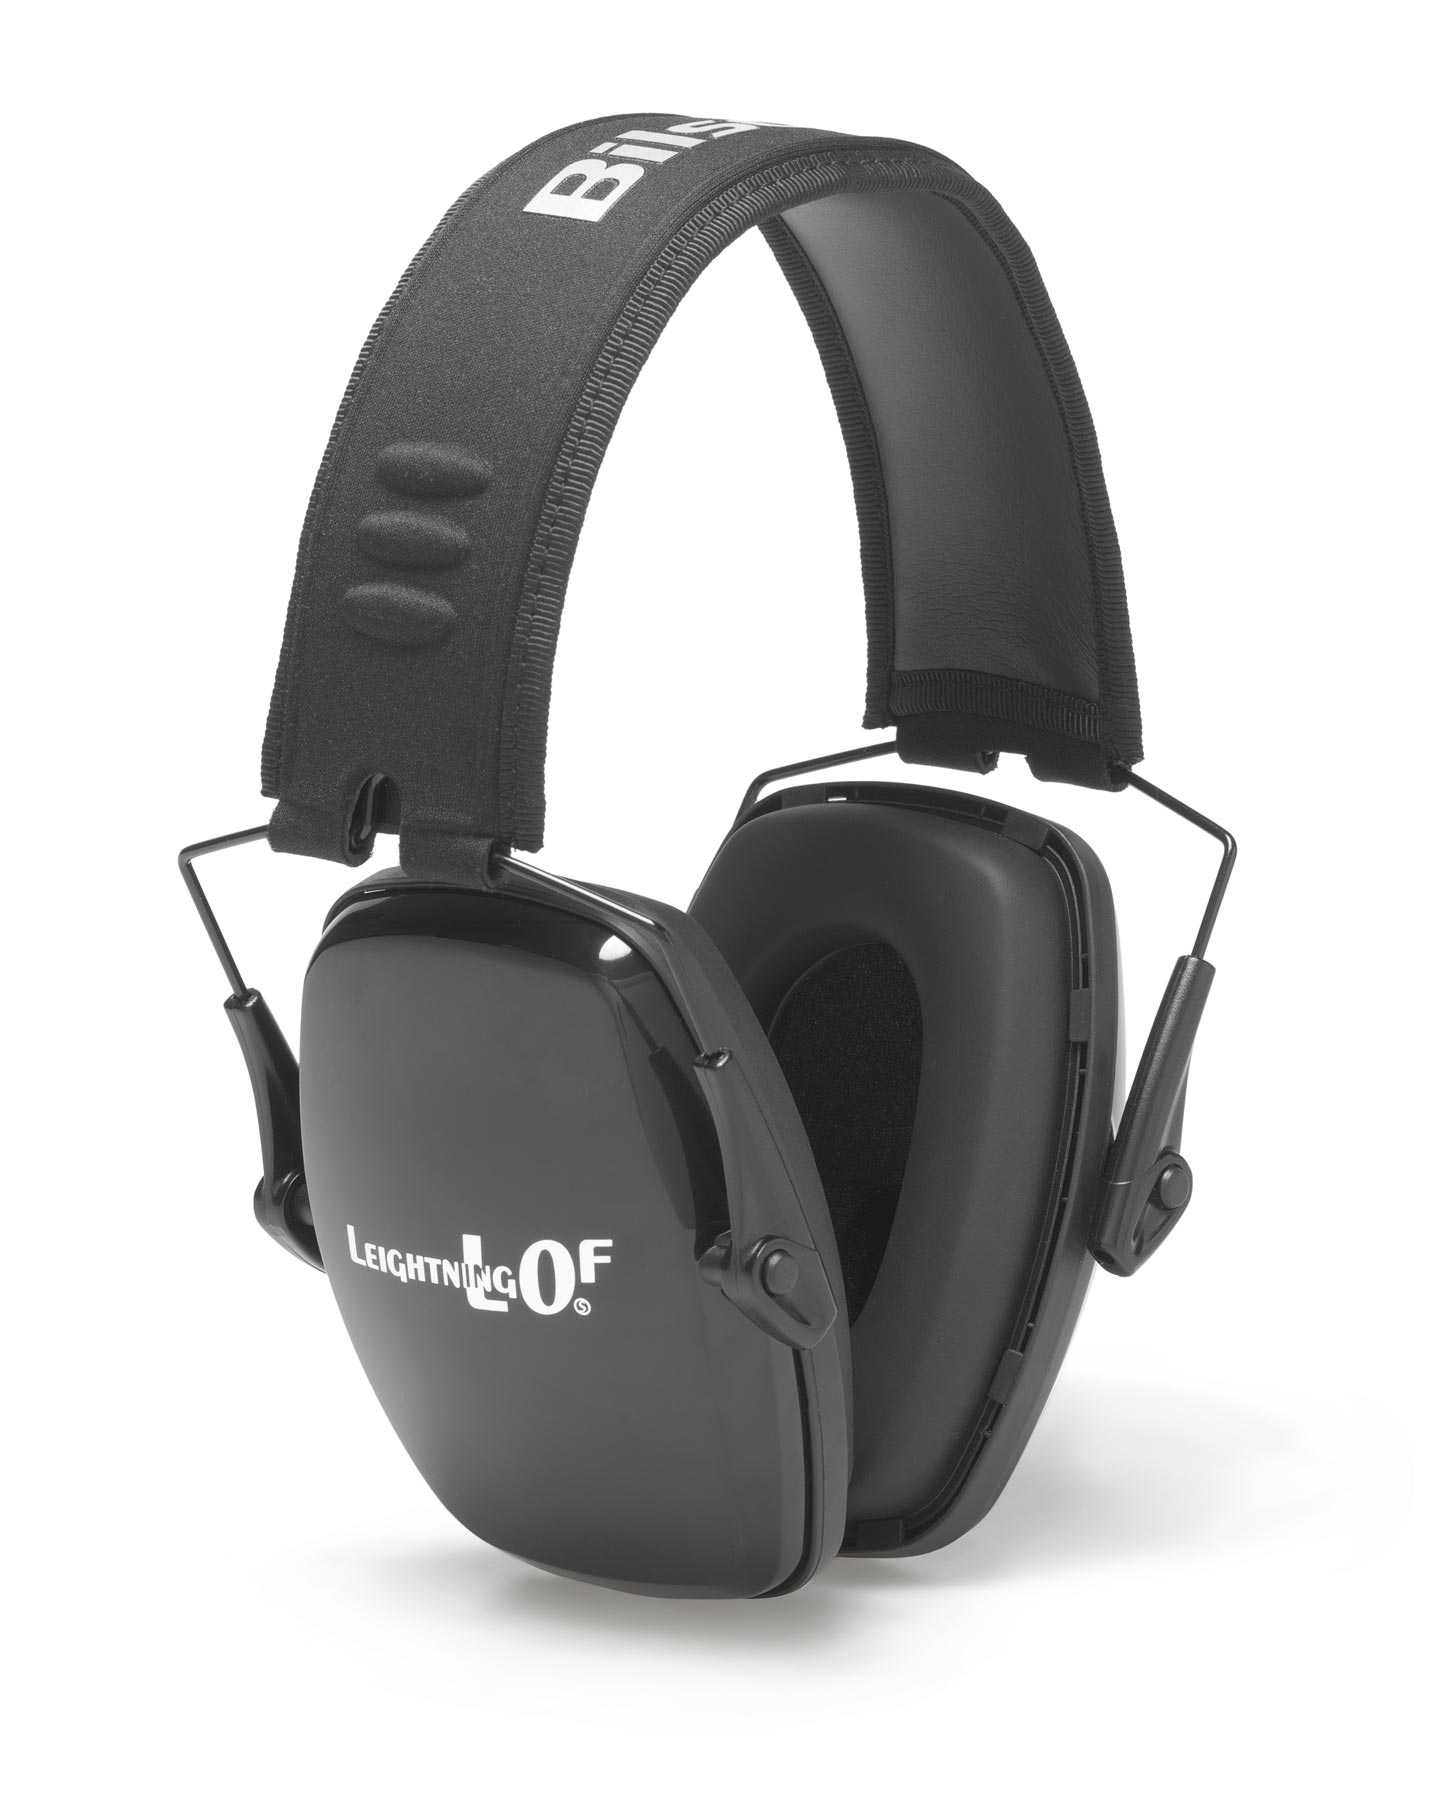 Designed to provide reliable protection for intermittent or marginal noise hazards, the L0 Series features an ultraslim earcup design with less weight and bulk than standard earmuffs, and is available in Folding (L0F) and Neckband (L0N) models. The L0F Folding model with steel wire construction and